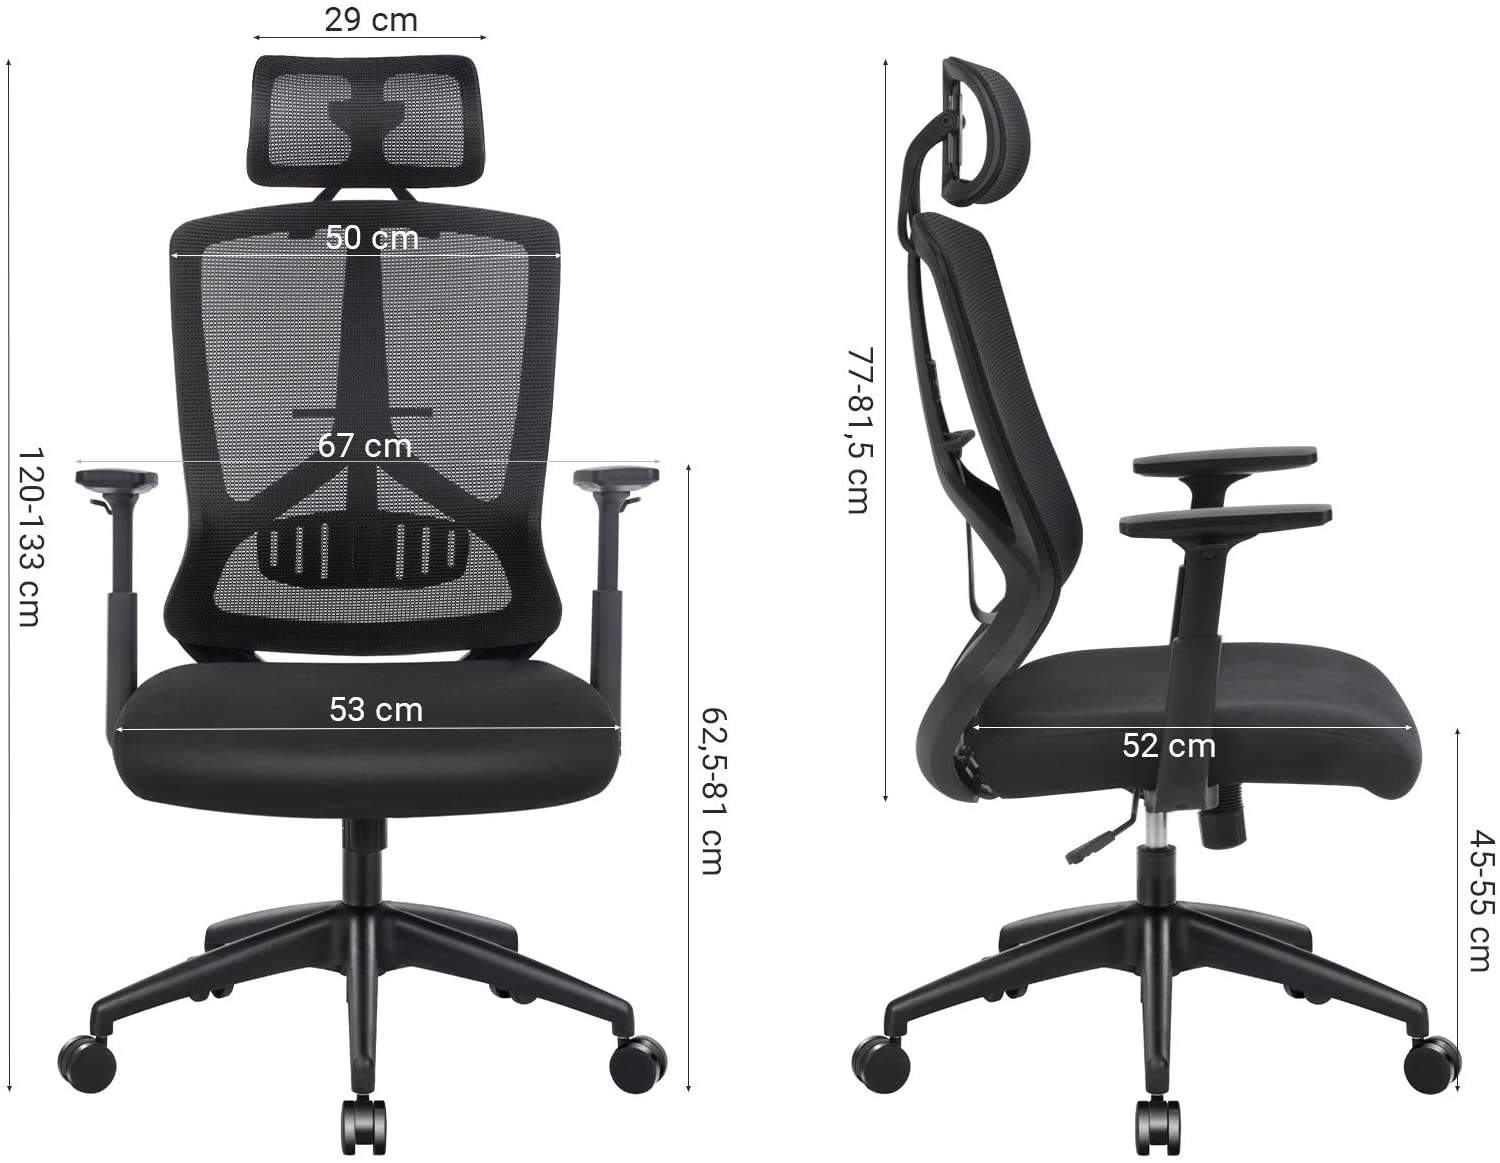 Ergonomic Office and Desk Chair with Lumbar RAW58.dk